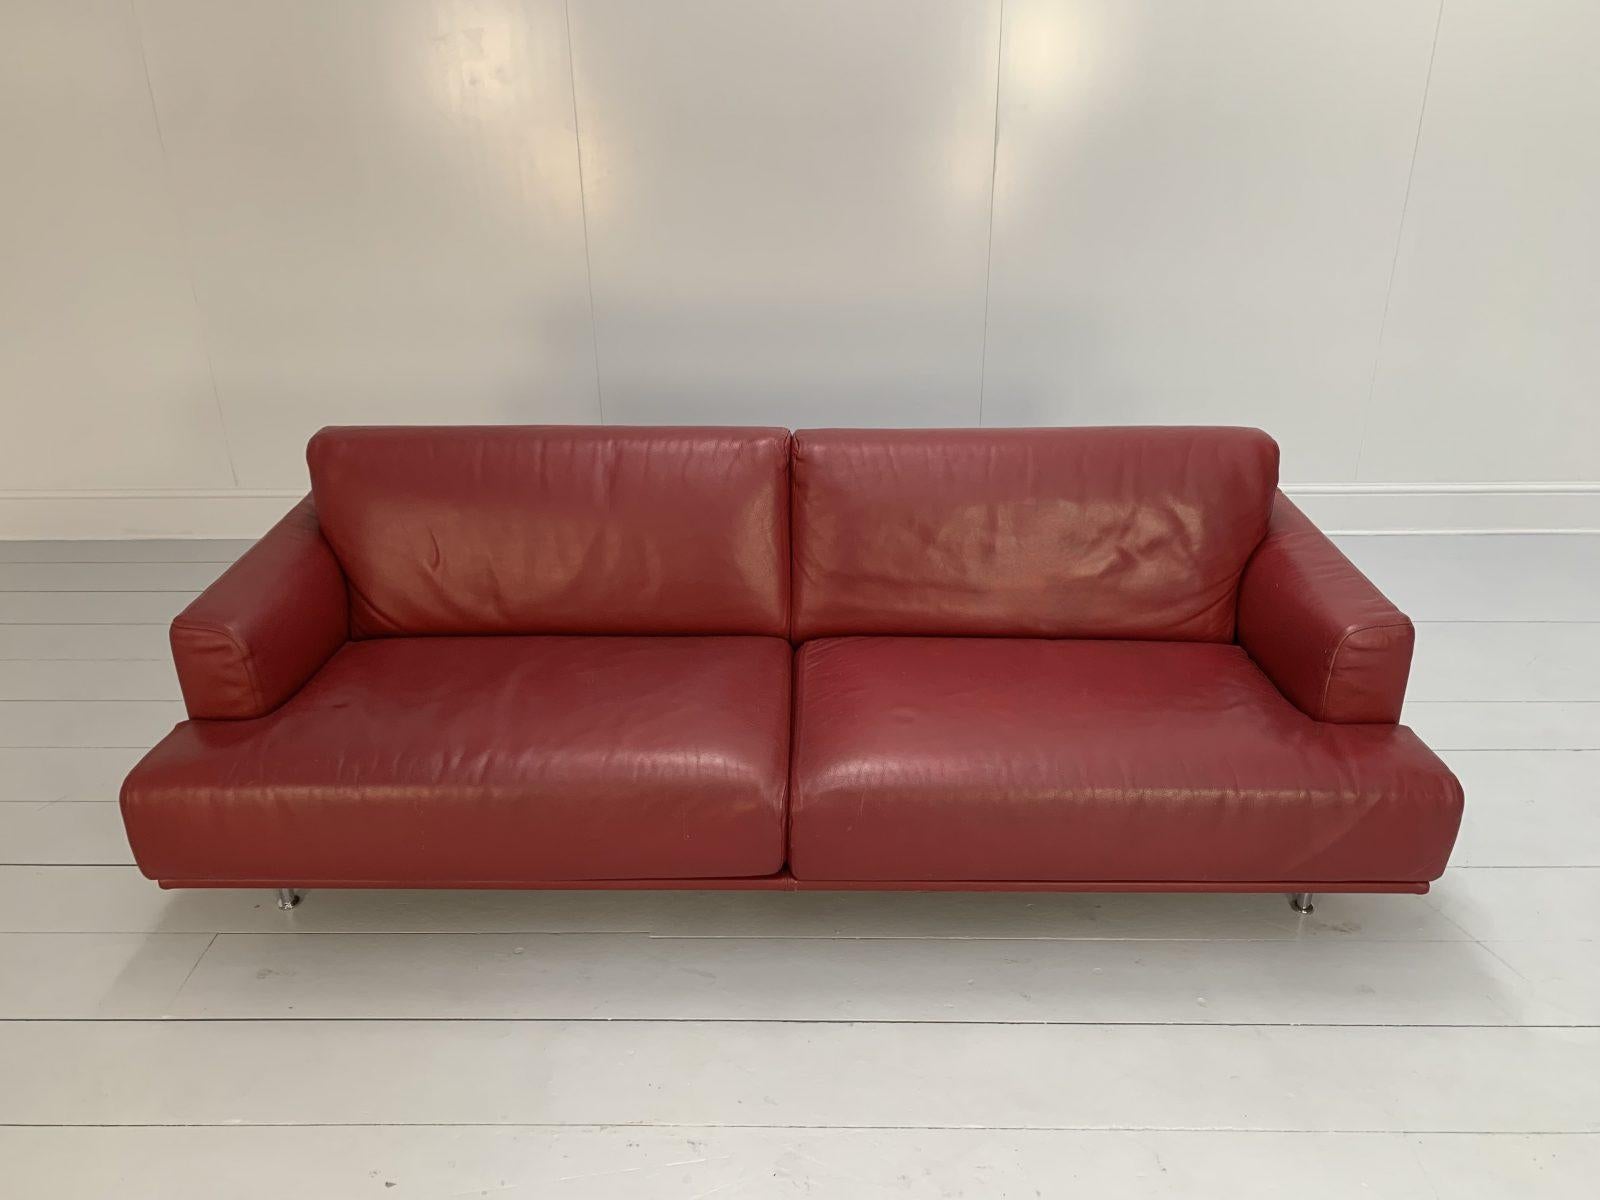 Cassina “253 Nest” 2.5-Seat Sofa & Bench Footstool – In Red “Pelle” Leather 3